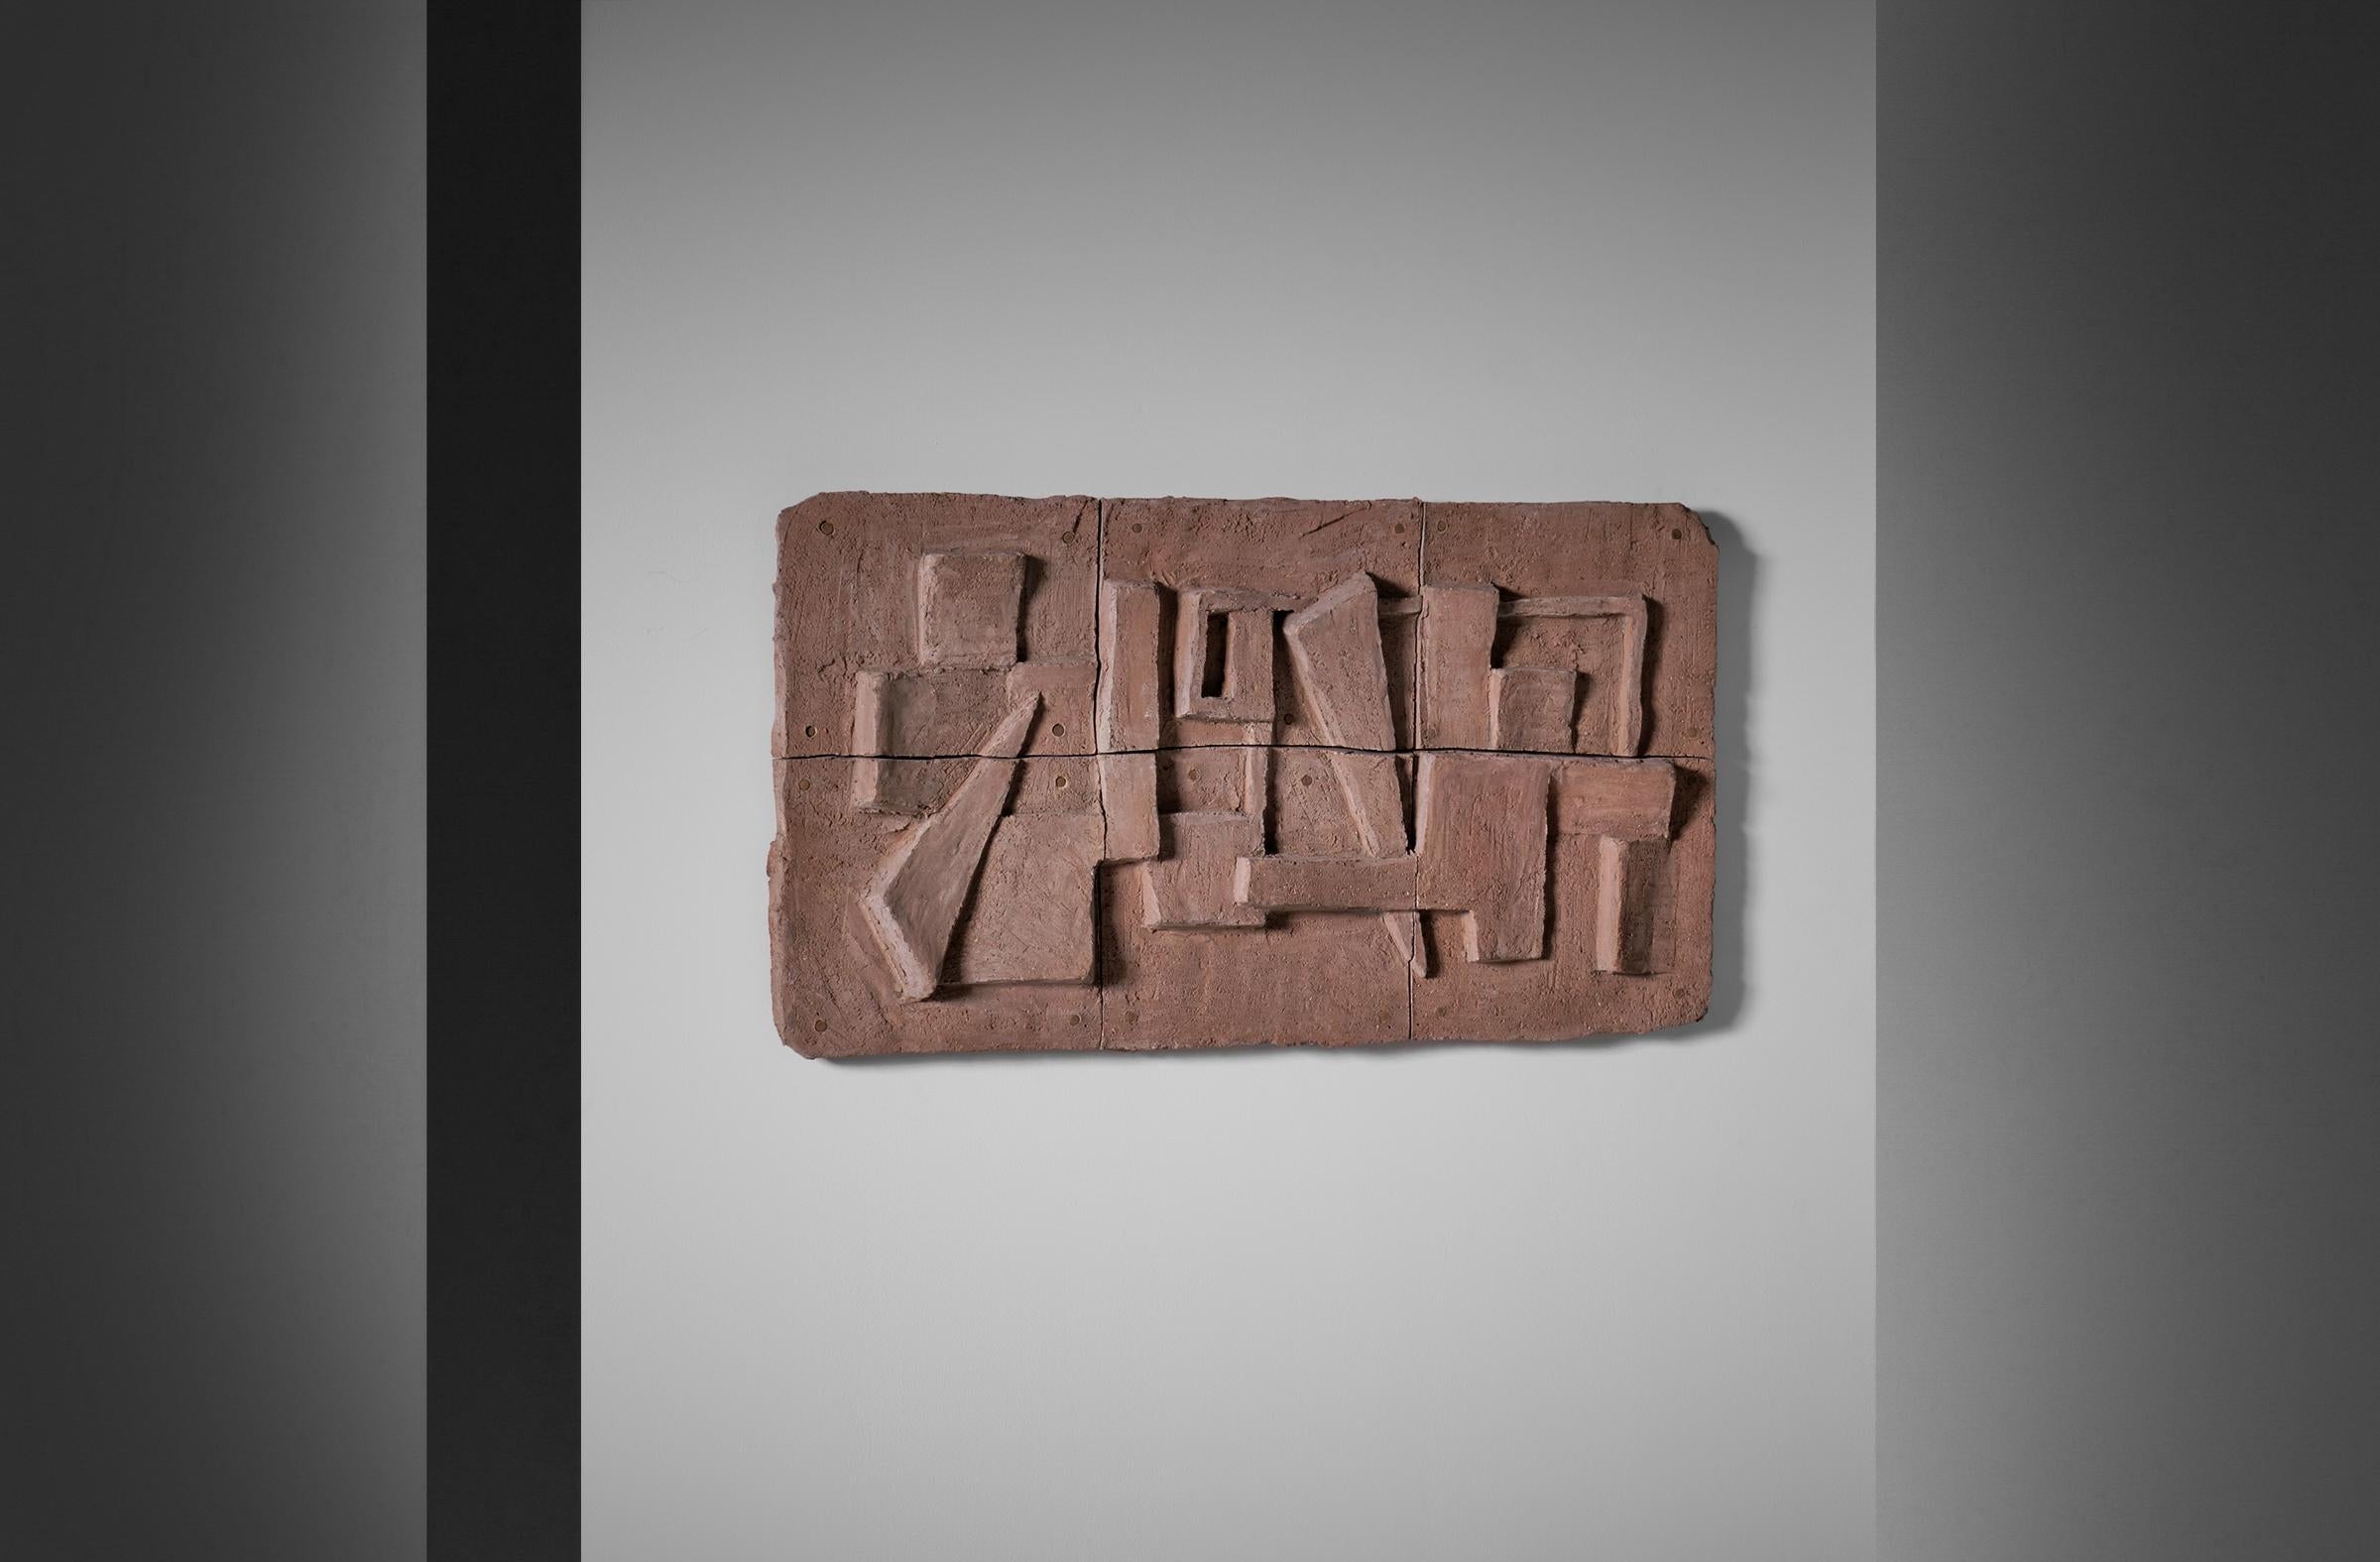 Abstract Wall relief by Vera Kapisoda, France 1960's. The artwork is made from chamotte clay and is showing a composition of interesting abstract shapes. The work is very dynamic due to the relief and structured surface which catches the light in a